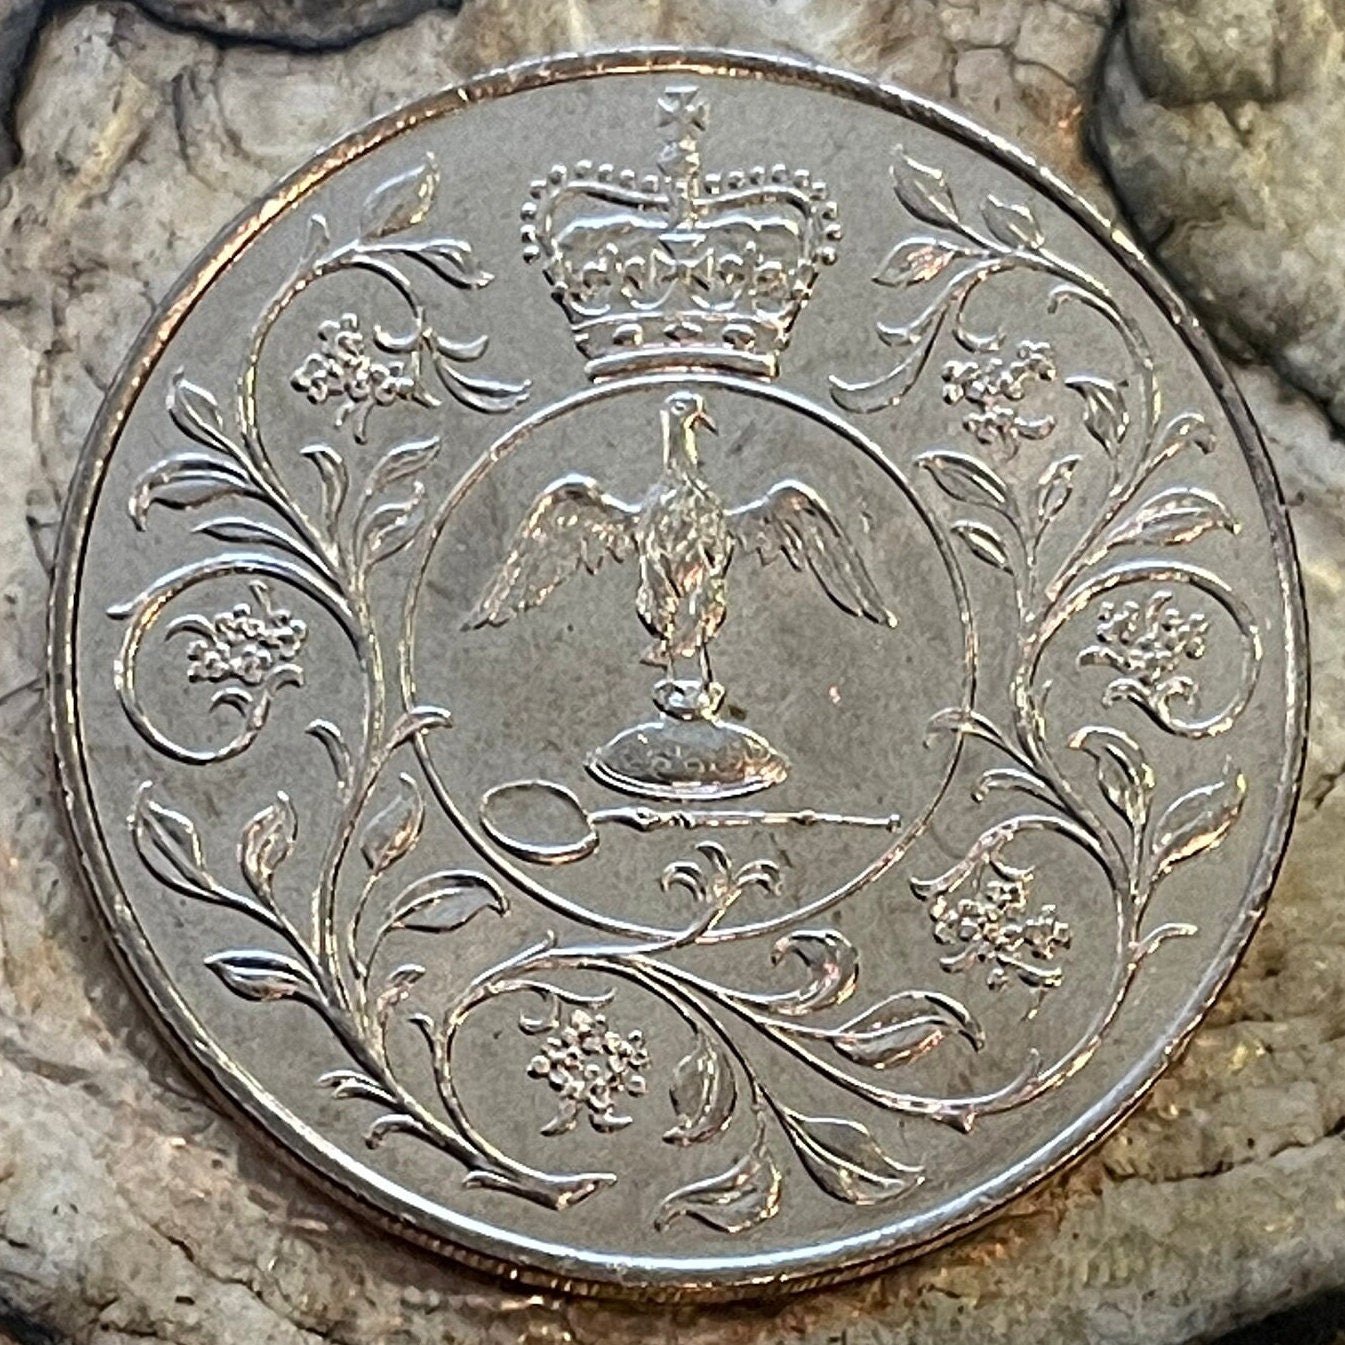 Horseback Queen Elizabeth II & Coronation Regalia 25 New Pence Authentic Coin Money for Jewelry and Craft Making (25th Anniversary) (1977)